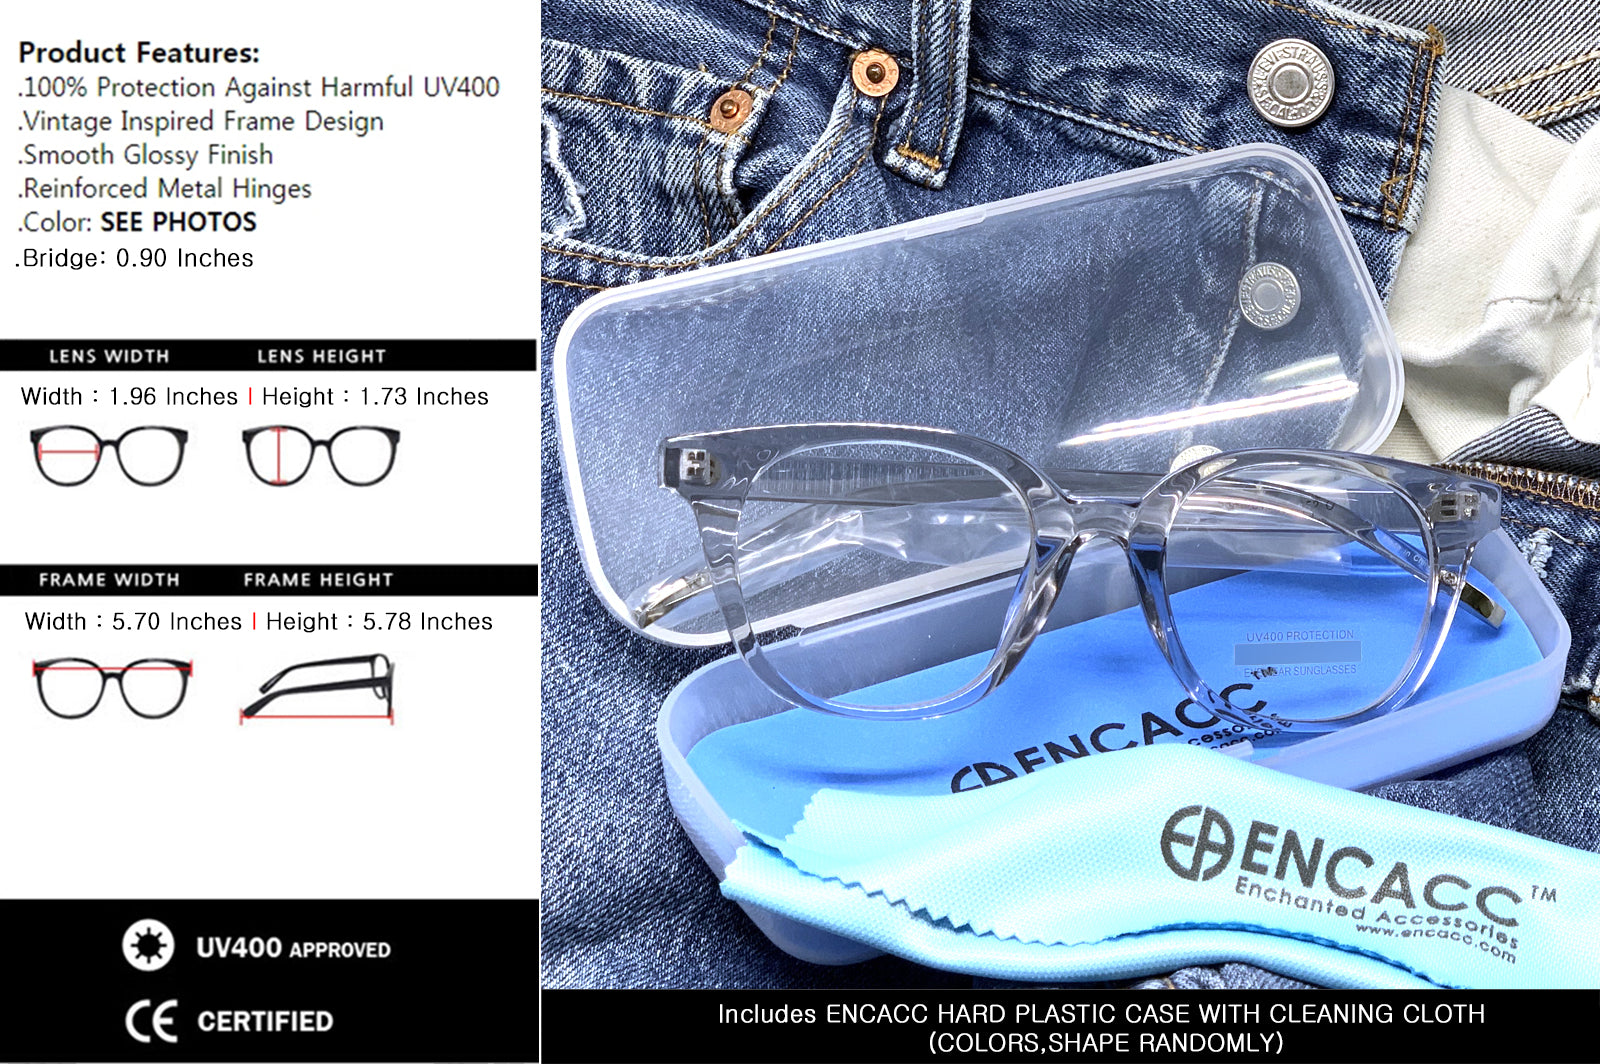 encacc.com This Perfect functional Items will be Your Best Choice